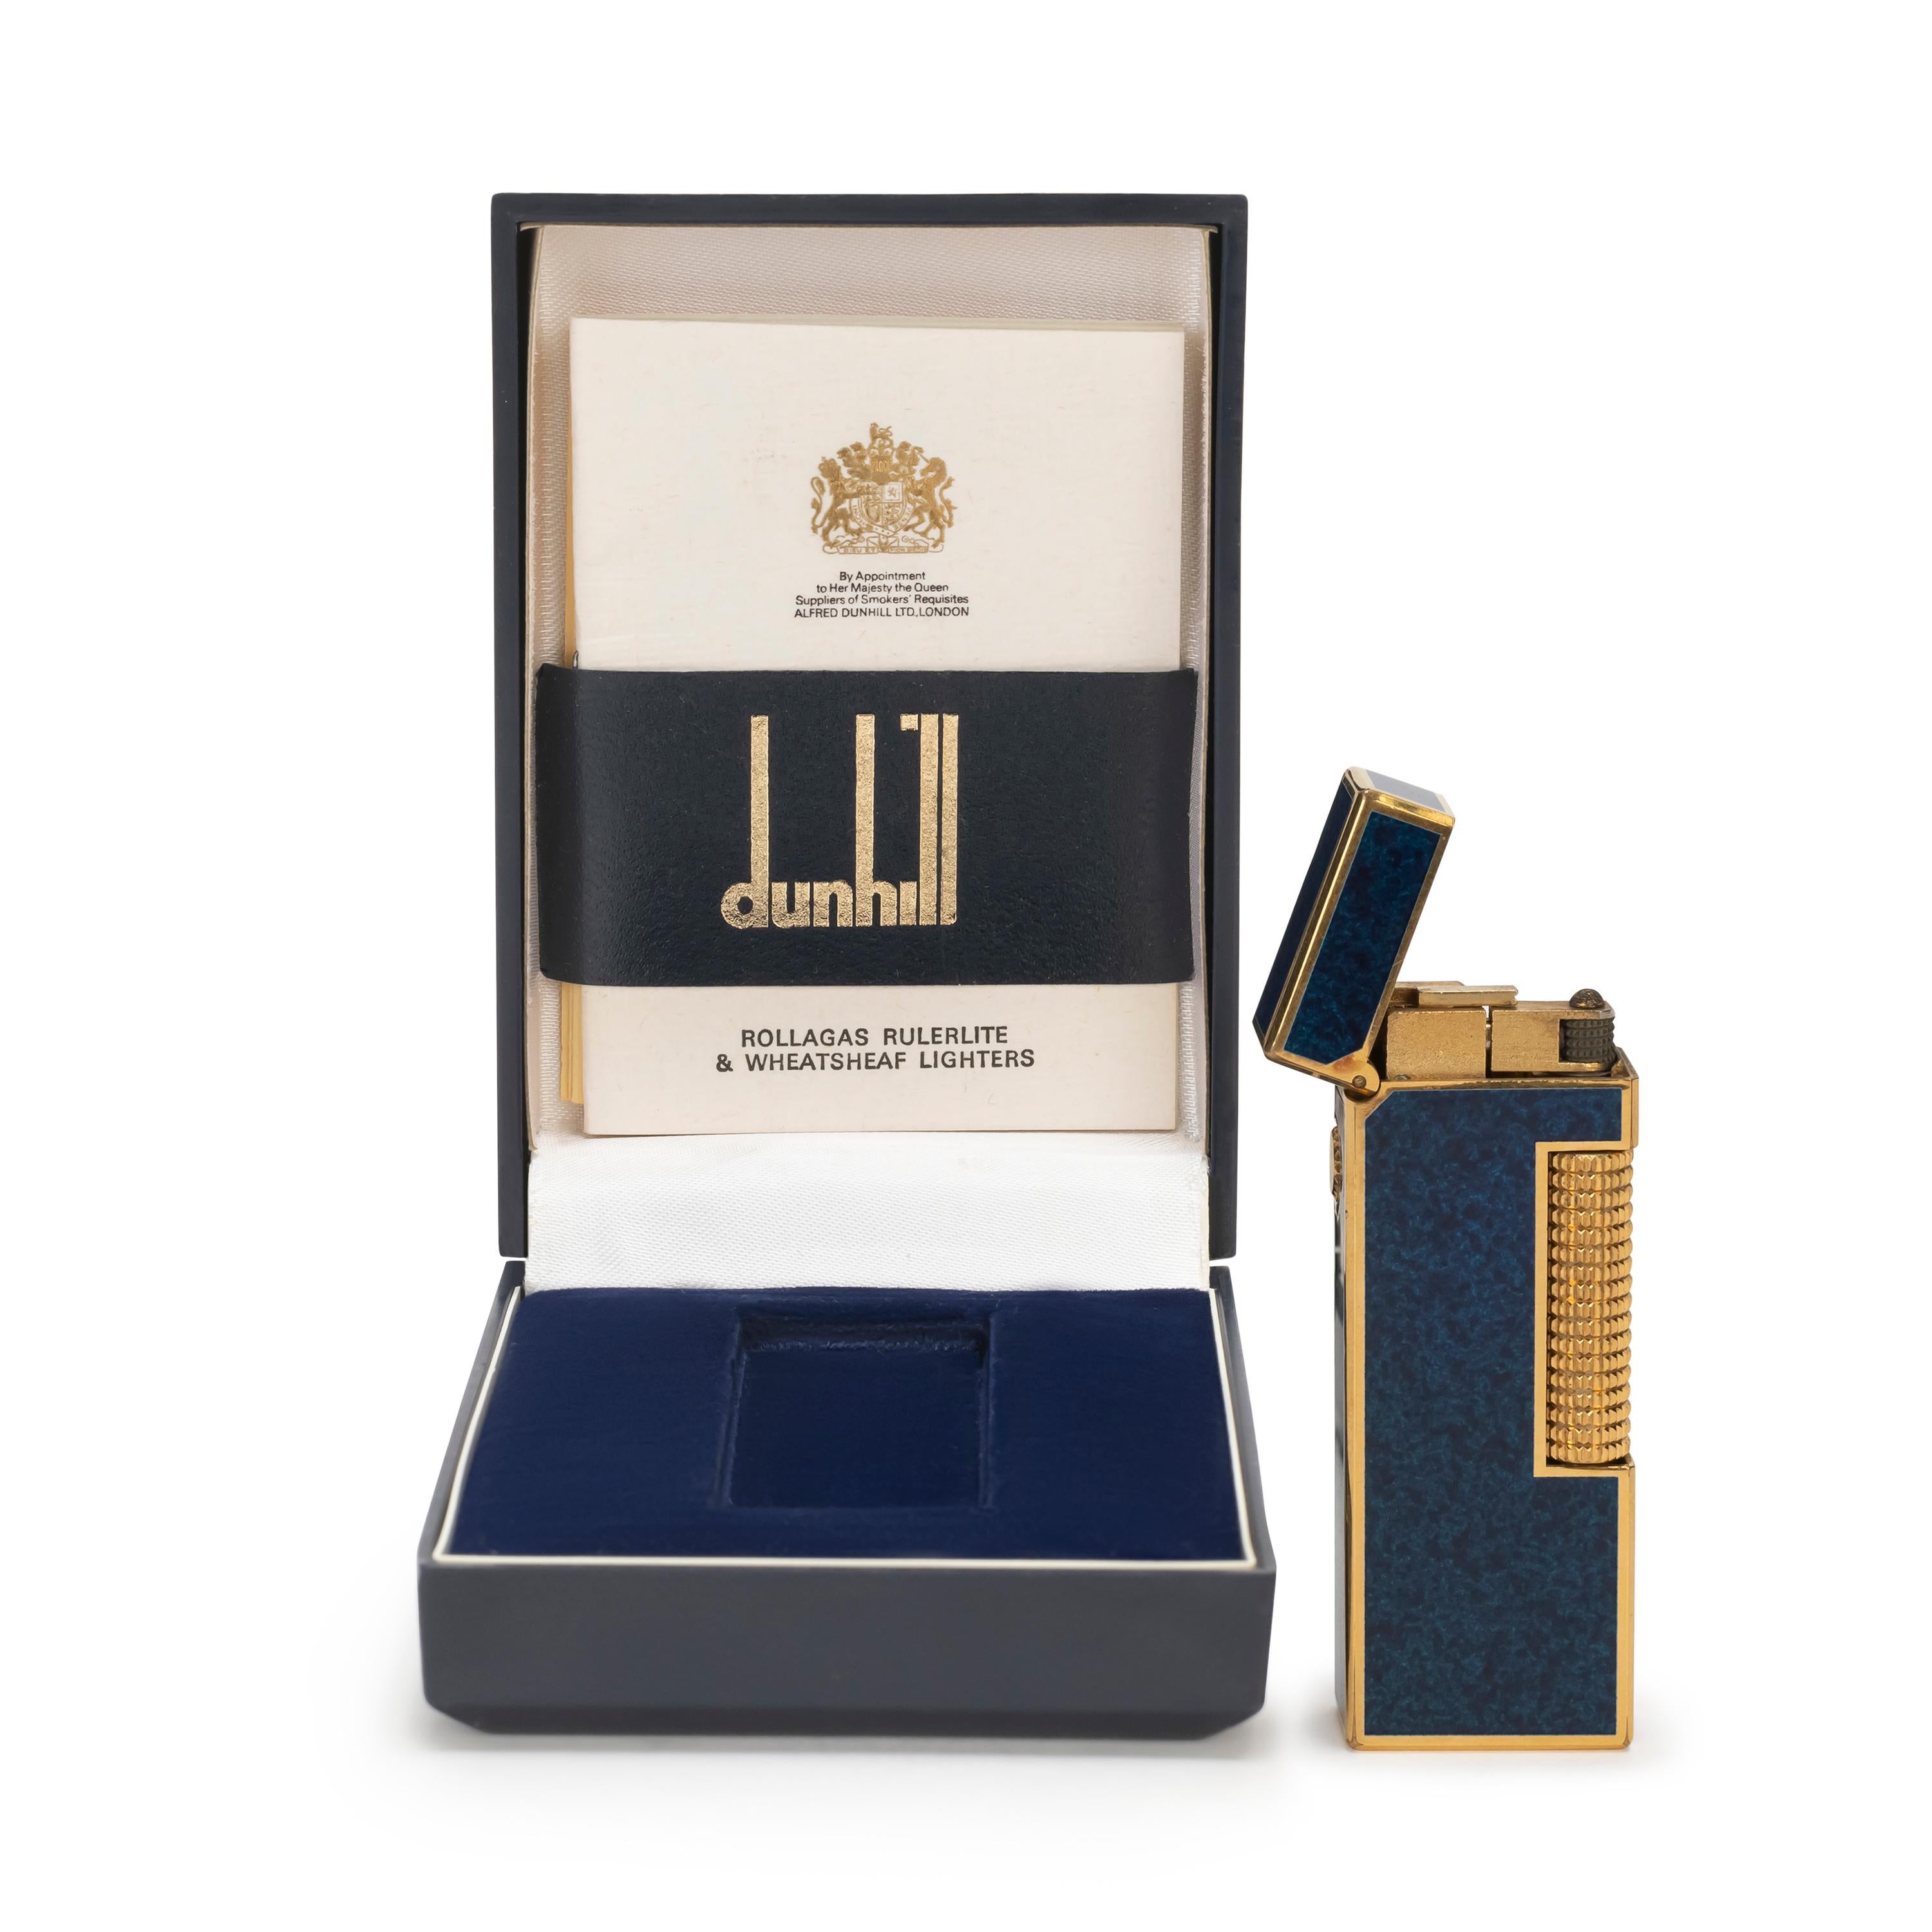 Elegant and Chic Rare Iconic Vintage Dunhill Gold Plated and Dark Blue Lacquer Swiss Made Lighter.
This 1970s Vintage Dunhill is gold plated and has a dark Blue lacquer Swiss Made lighter In mint condition.
Works perfectly. 
Iconic and beautifully